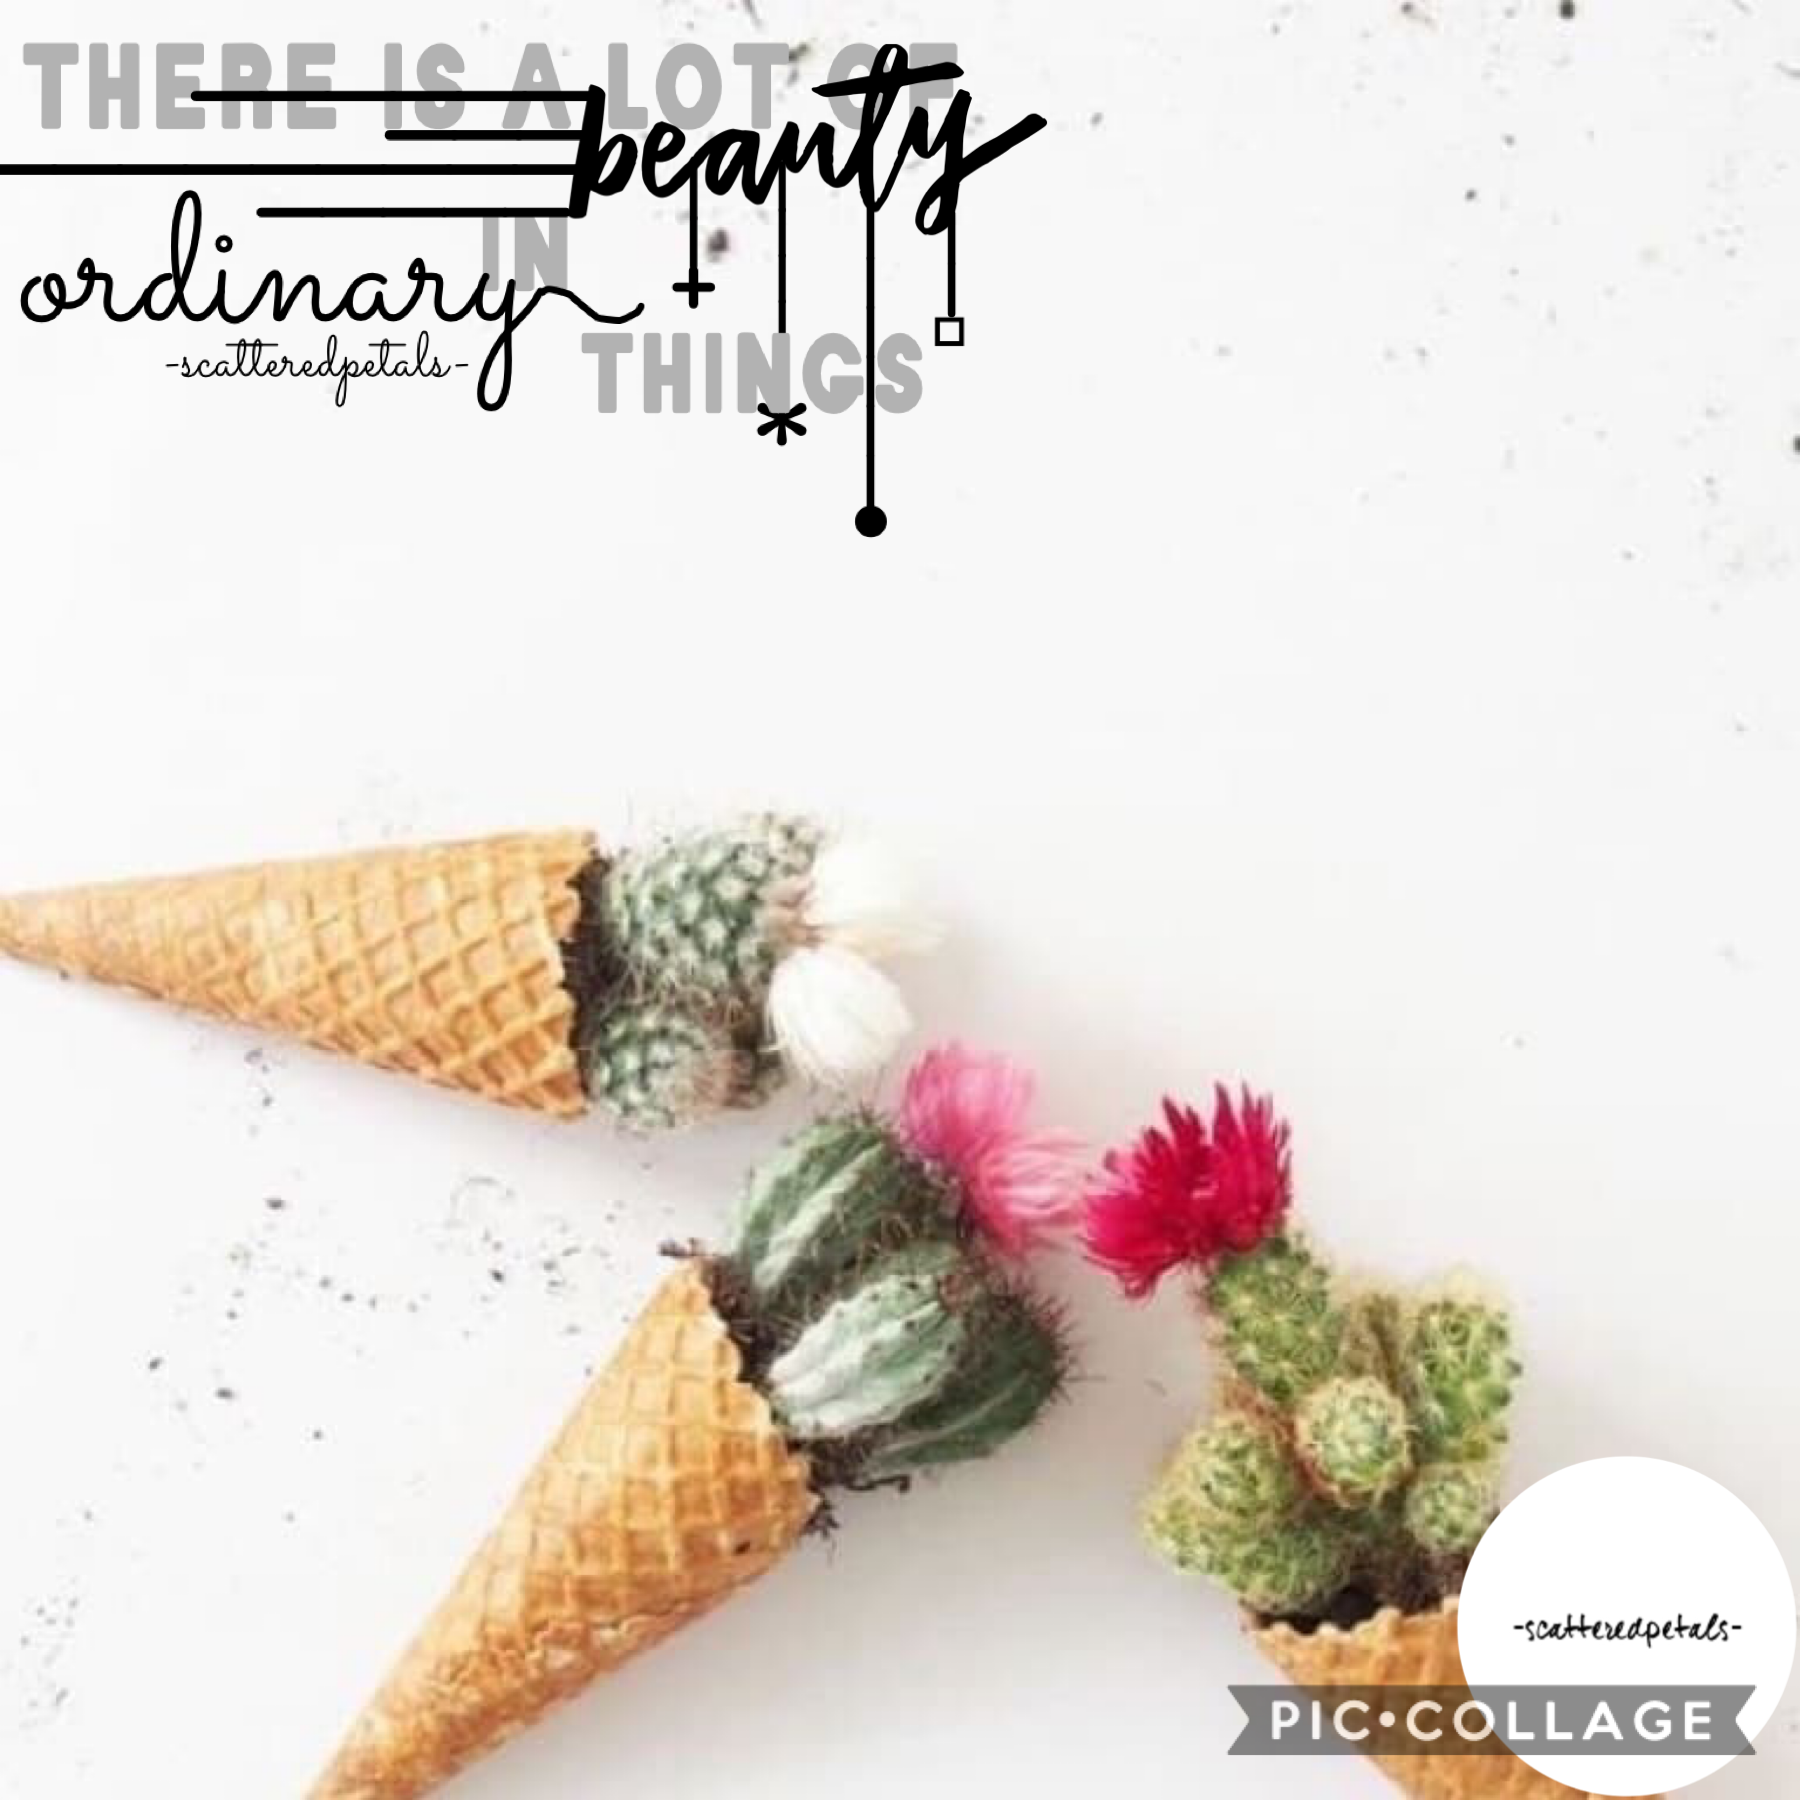 Tap
What do you think?
Quote” There is a lot of beauty in ordinary things”
7/22/20

Enjoy